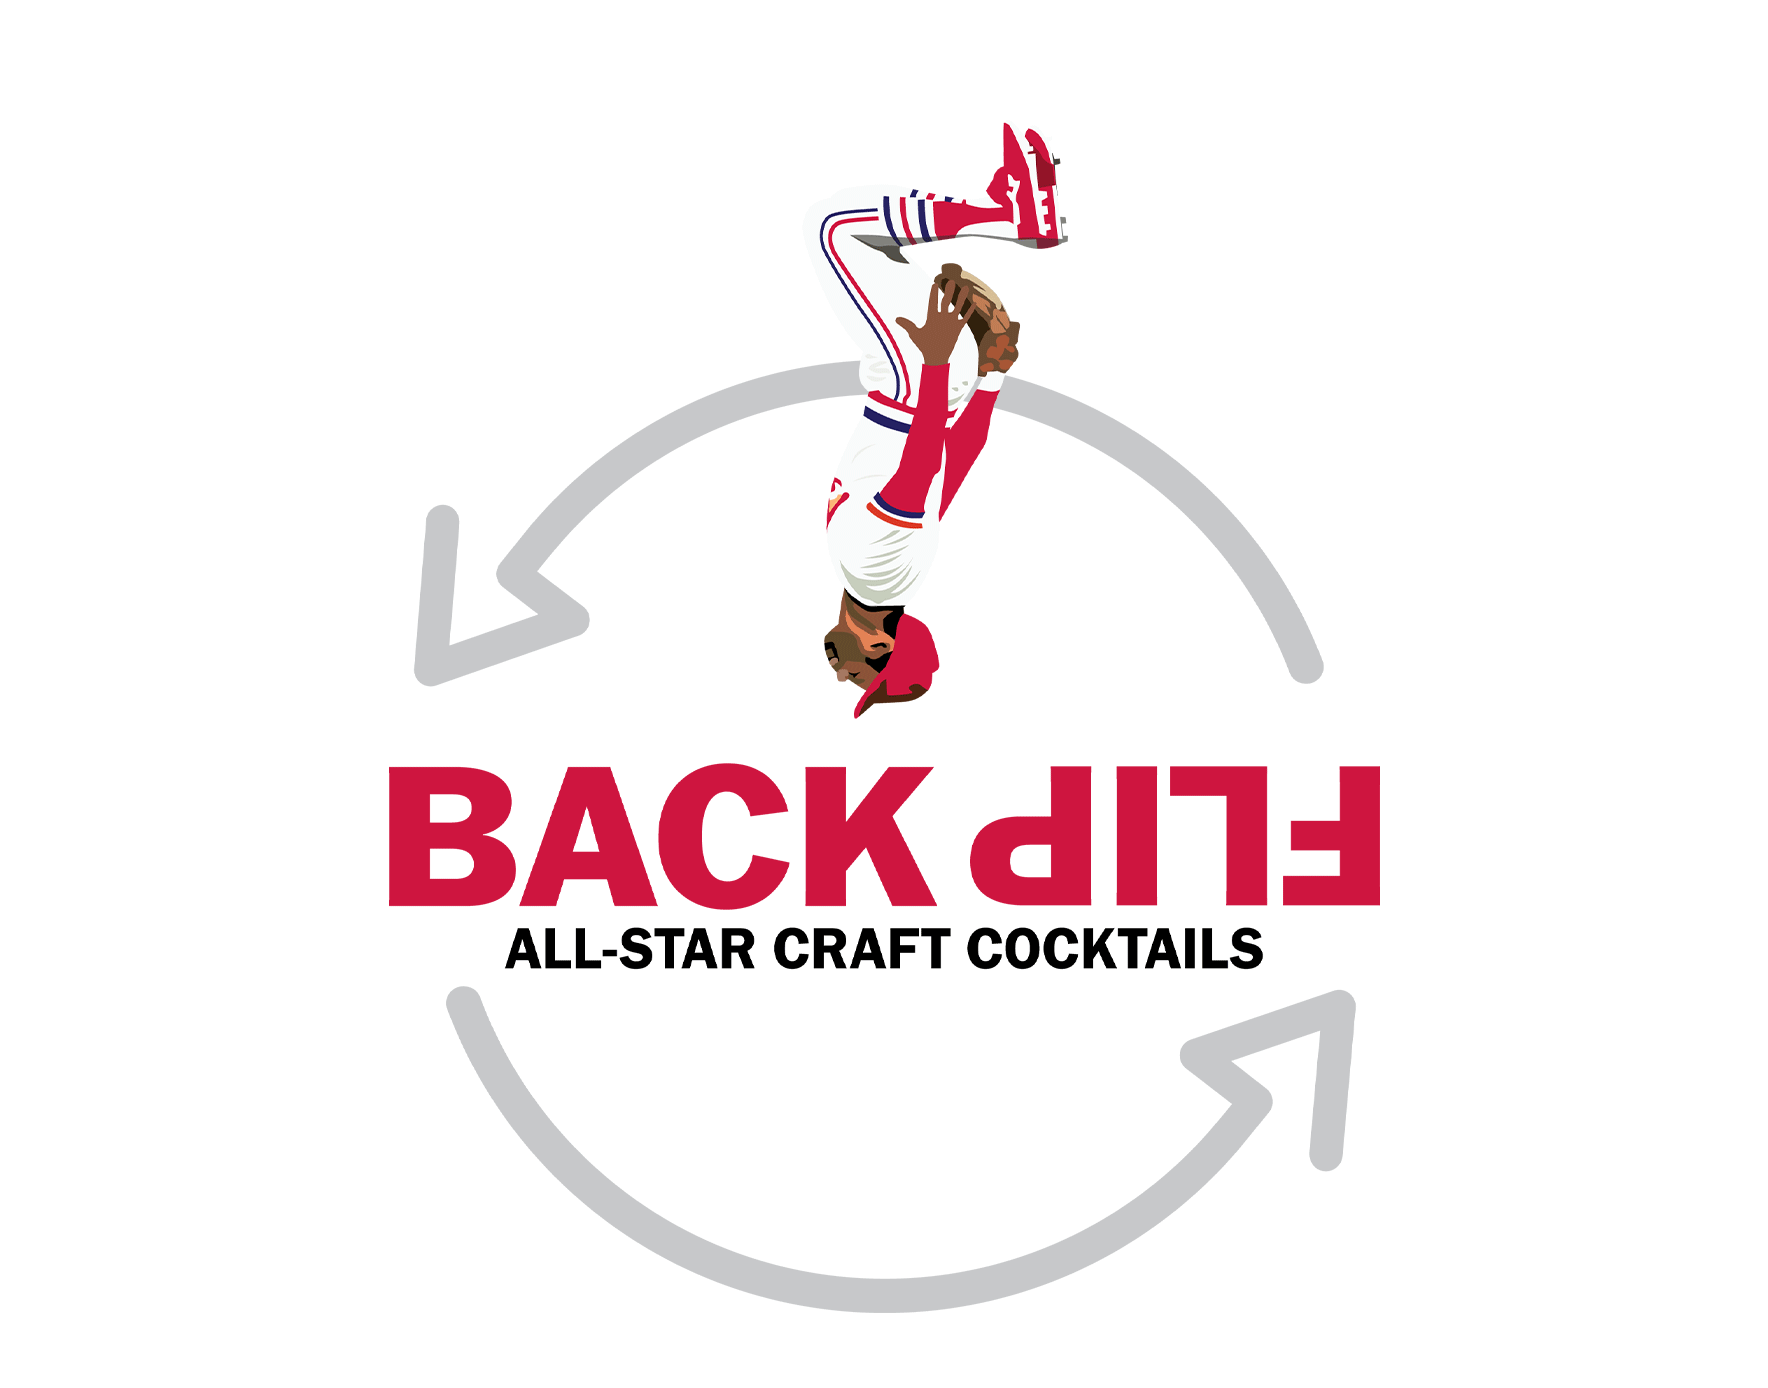 BackFlip All-Star Craft Cocktails Ozzie Smith backflipping